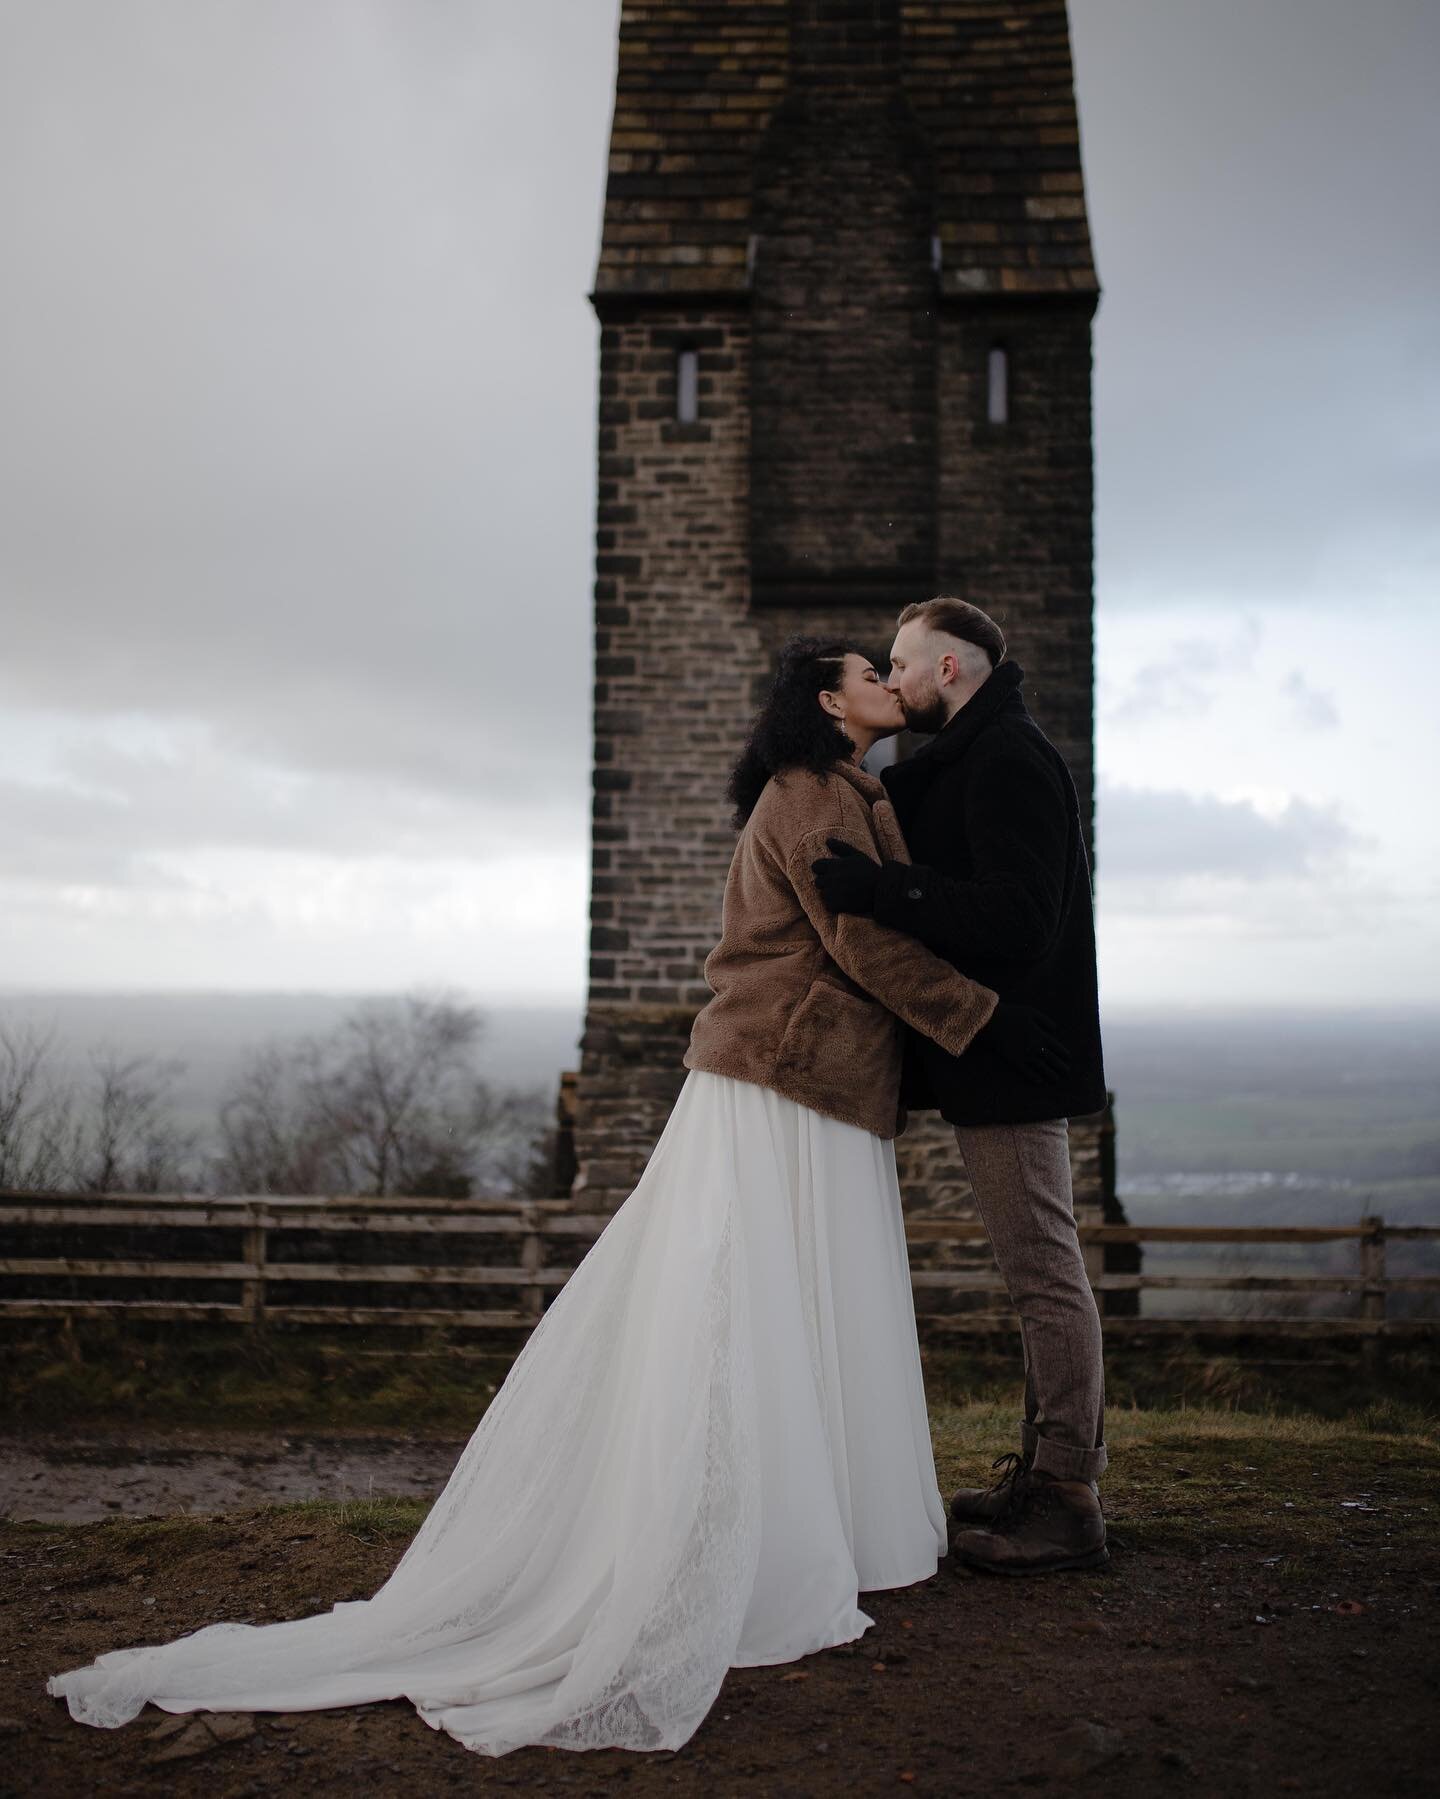 Those crisp chilly months are no less beautiful for a wedding or elopement. If anything, it means you get to add gorgeous, cozy coats to your ensemble, and who doesn&rsquo;t love that?! 🌨️🌟

#rusticwedding #peakdistrictweddingphotographer #rivingto